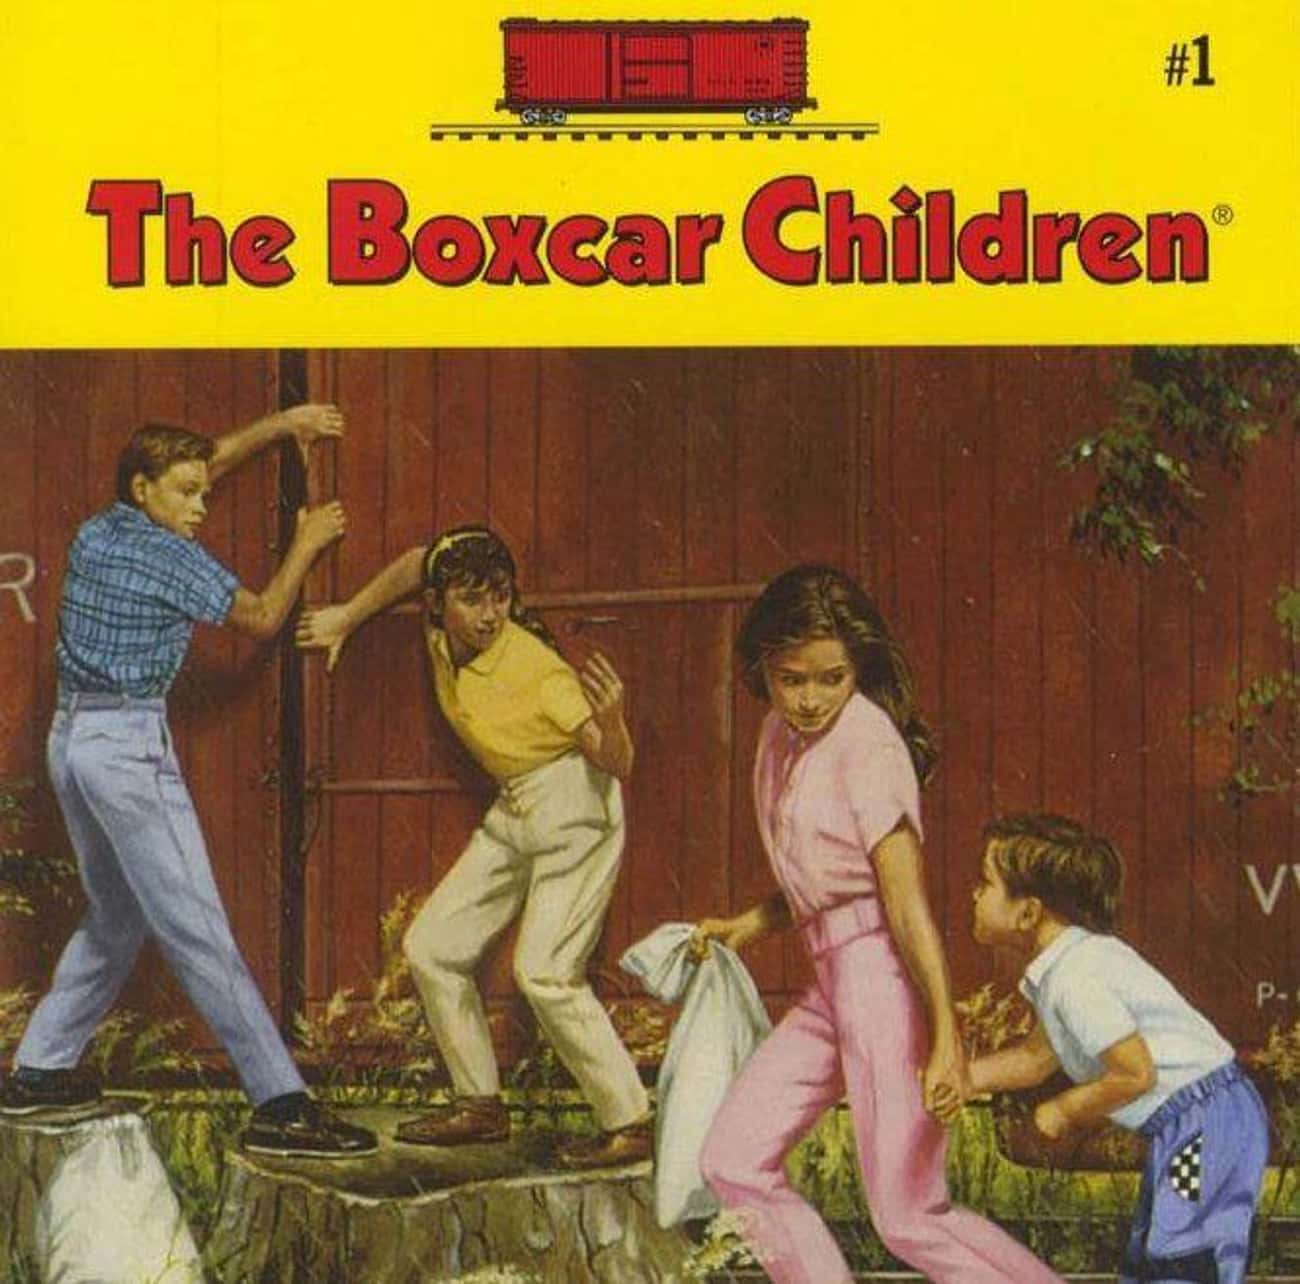 The Children Are Too Distraught To Live Outside The Boxcar